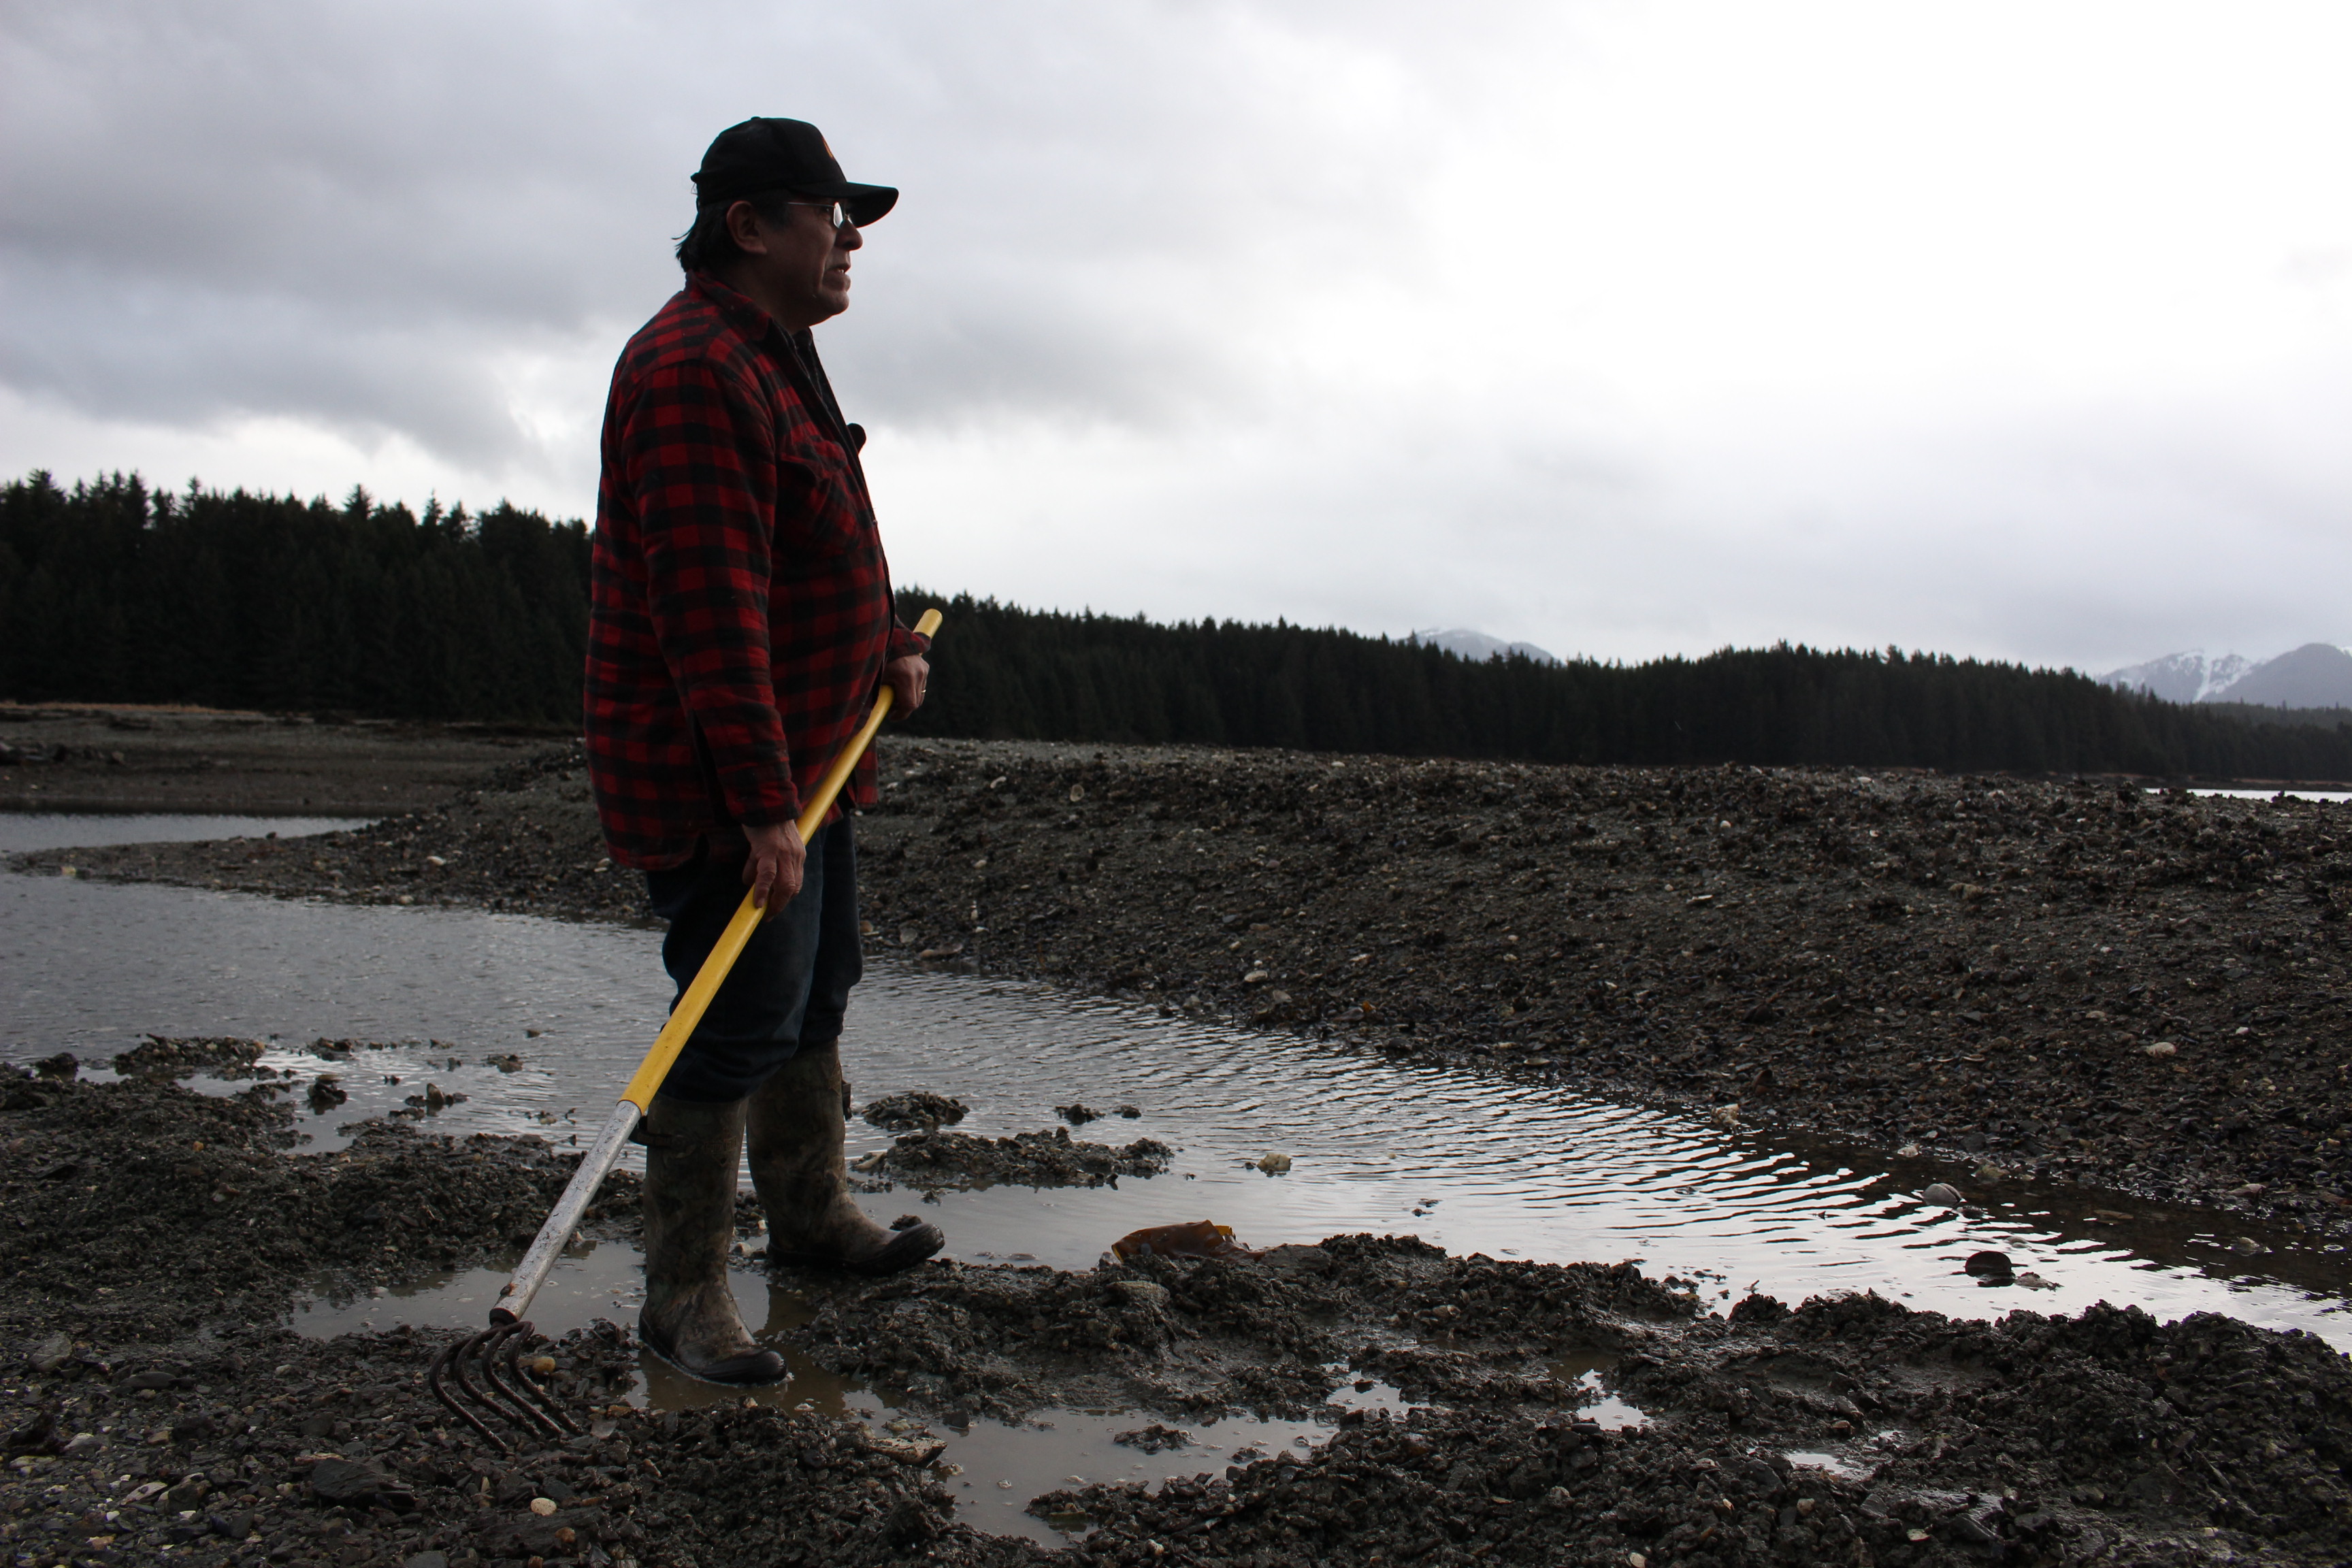 Alan Zuboff comes to these Angoon flats almost every day to dig for cockles. (Photo by Elizabeth Jenkins - KTOO)